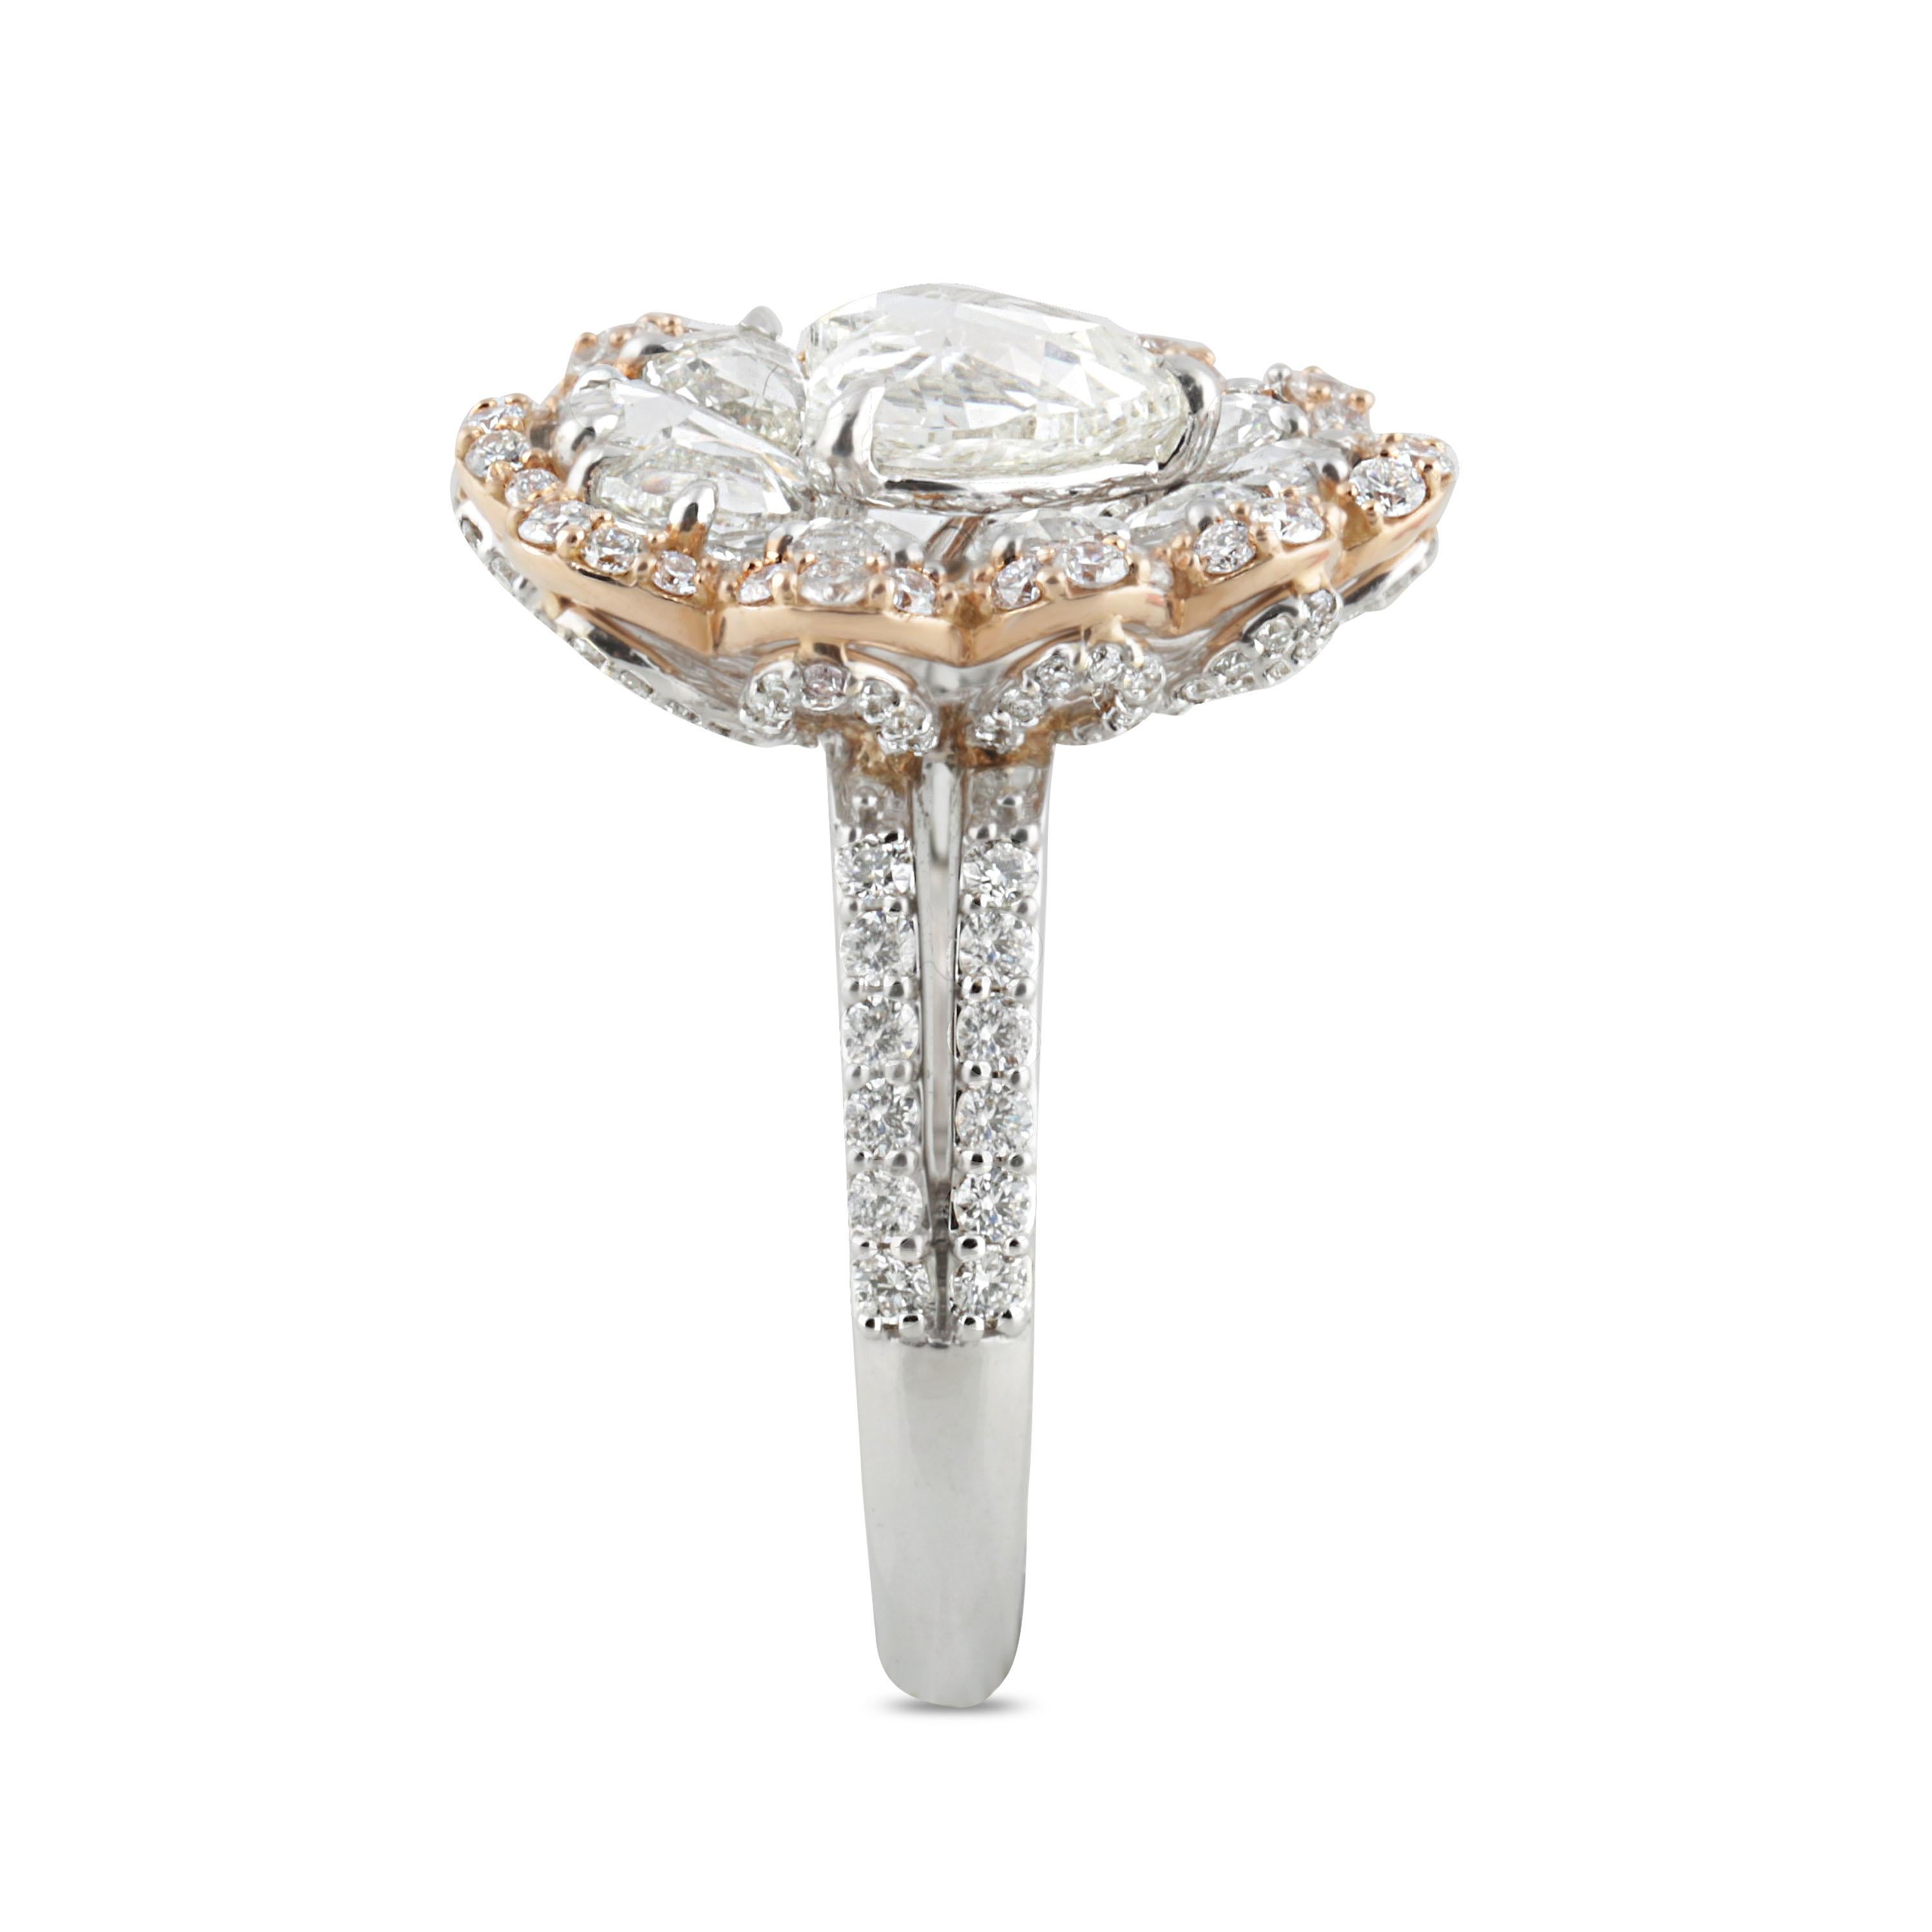 The timelessness of the design is what makes this 18K white and rose gold, floral-motif ring most enchanting. Adorned with brilliant cut and rosecut diamonds, this one-of-a-kind piece of jewellery is set gracefully using pavé and prong settings.